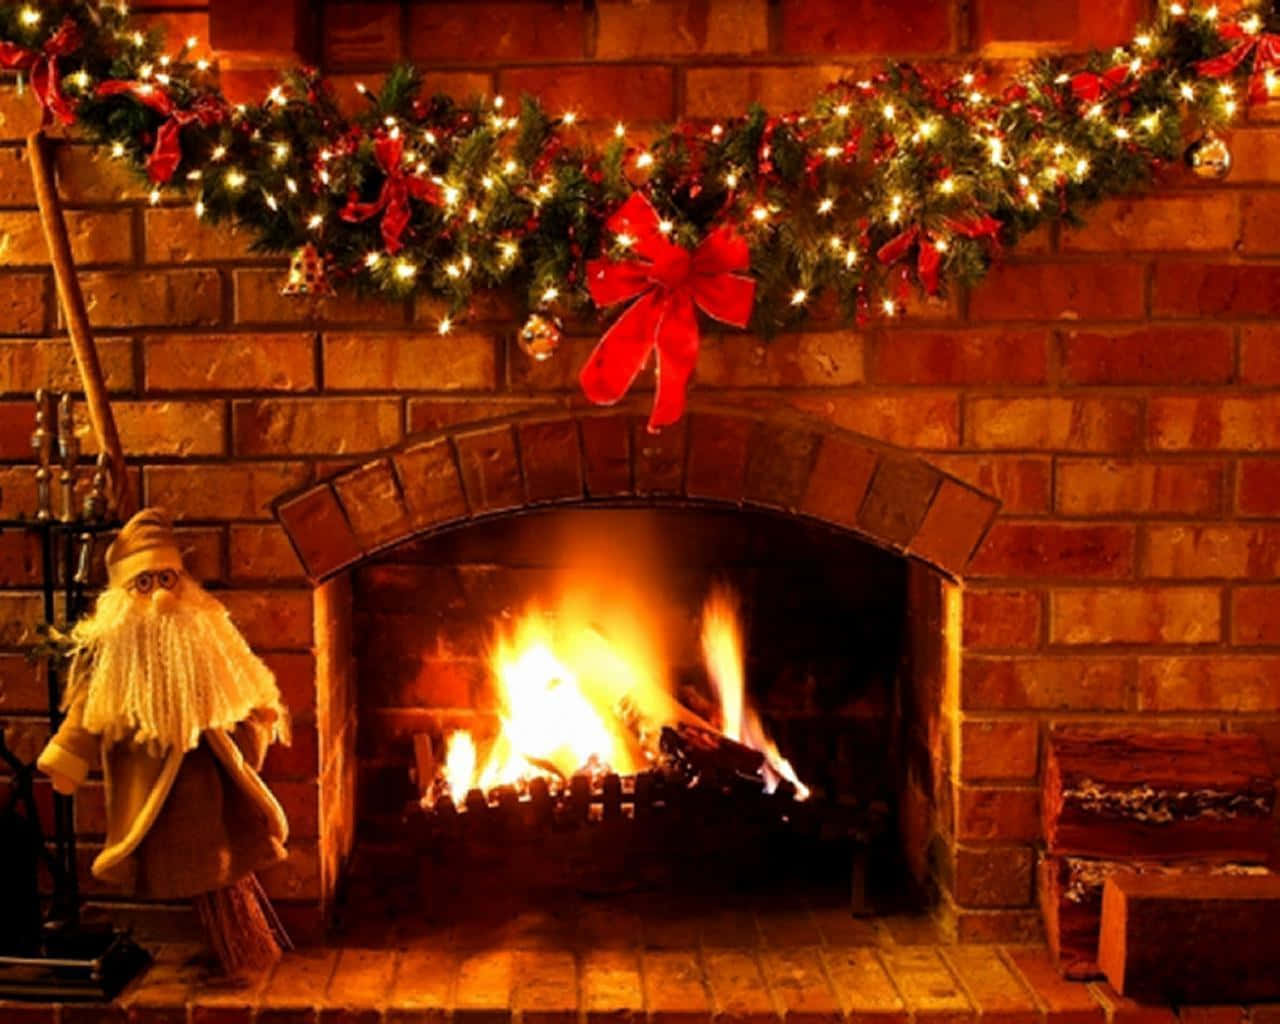 Enjoy the cozy ambiance of a real fireplace.